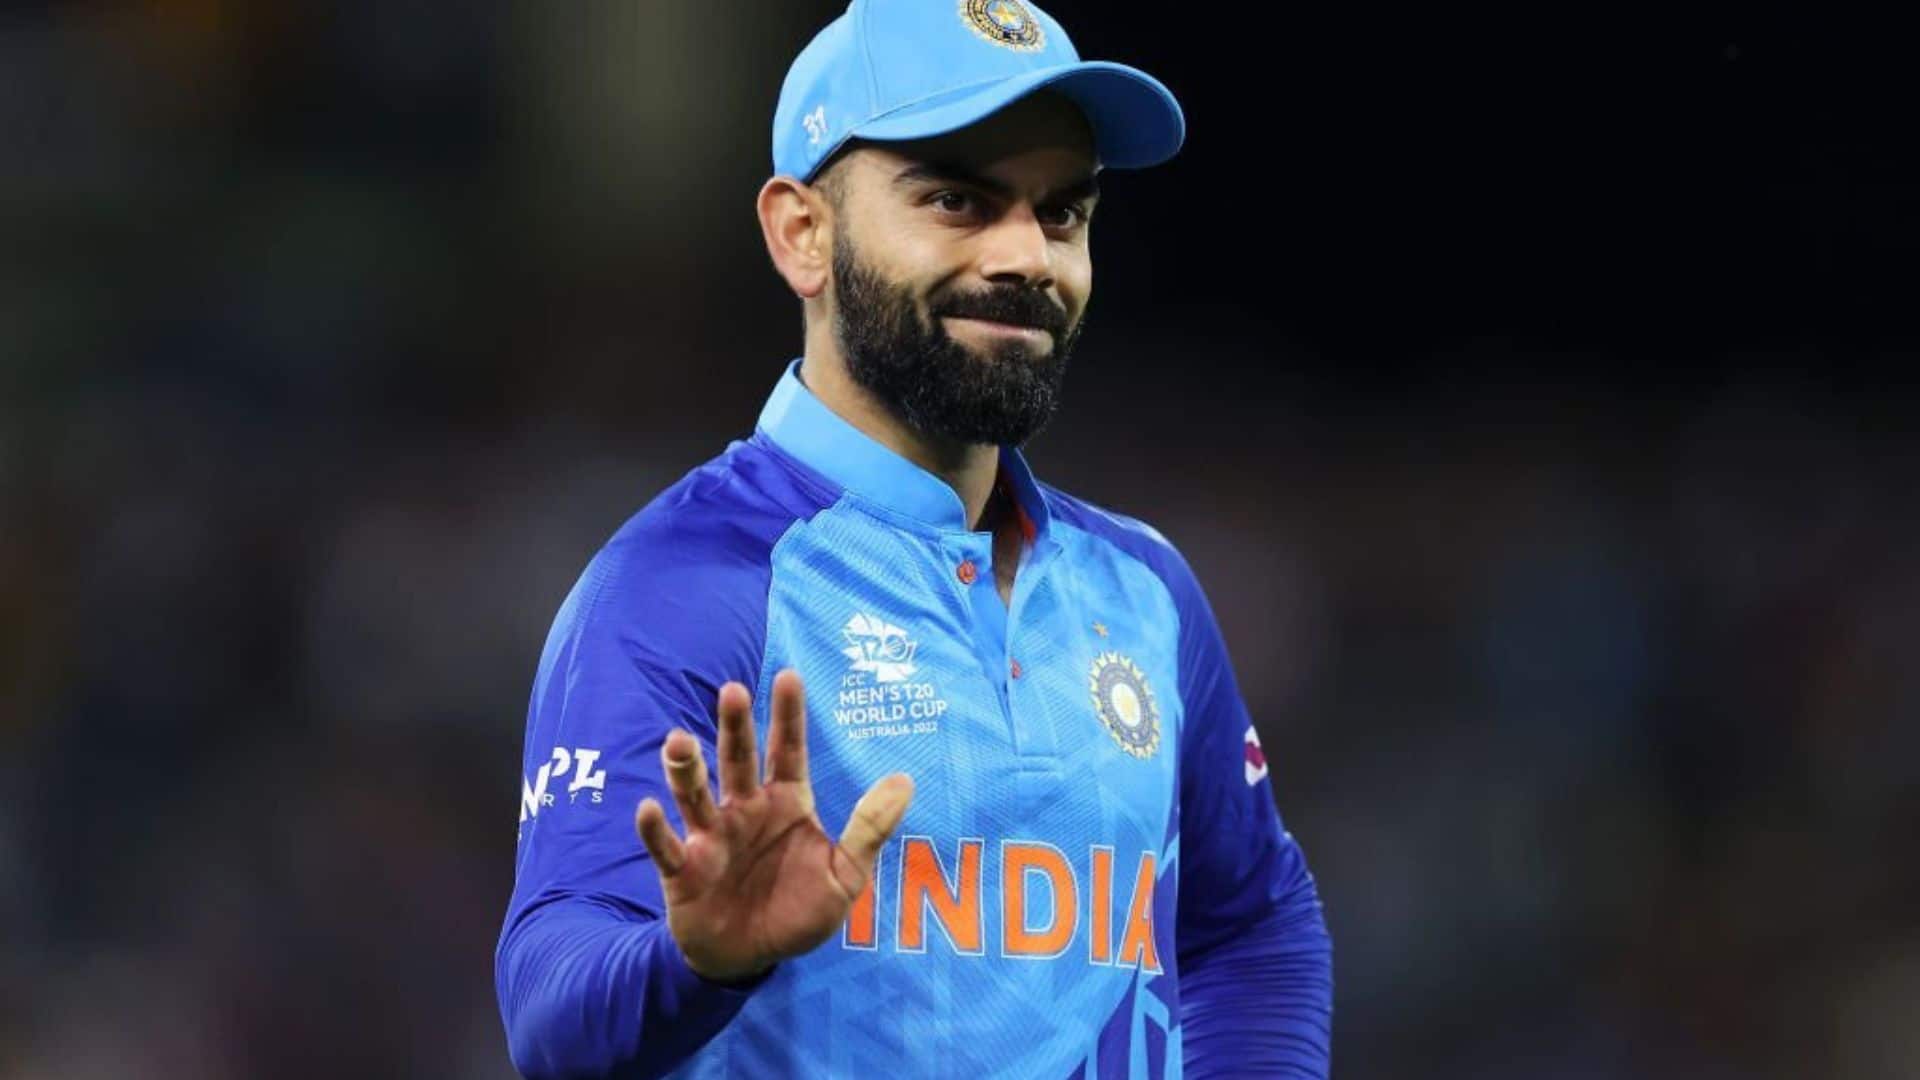 Virat Kohli Arrives In USA For T20 World Cup; Will He Play IND vs BAN Warm-Up Match?